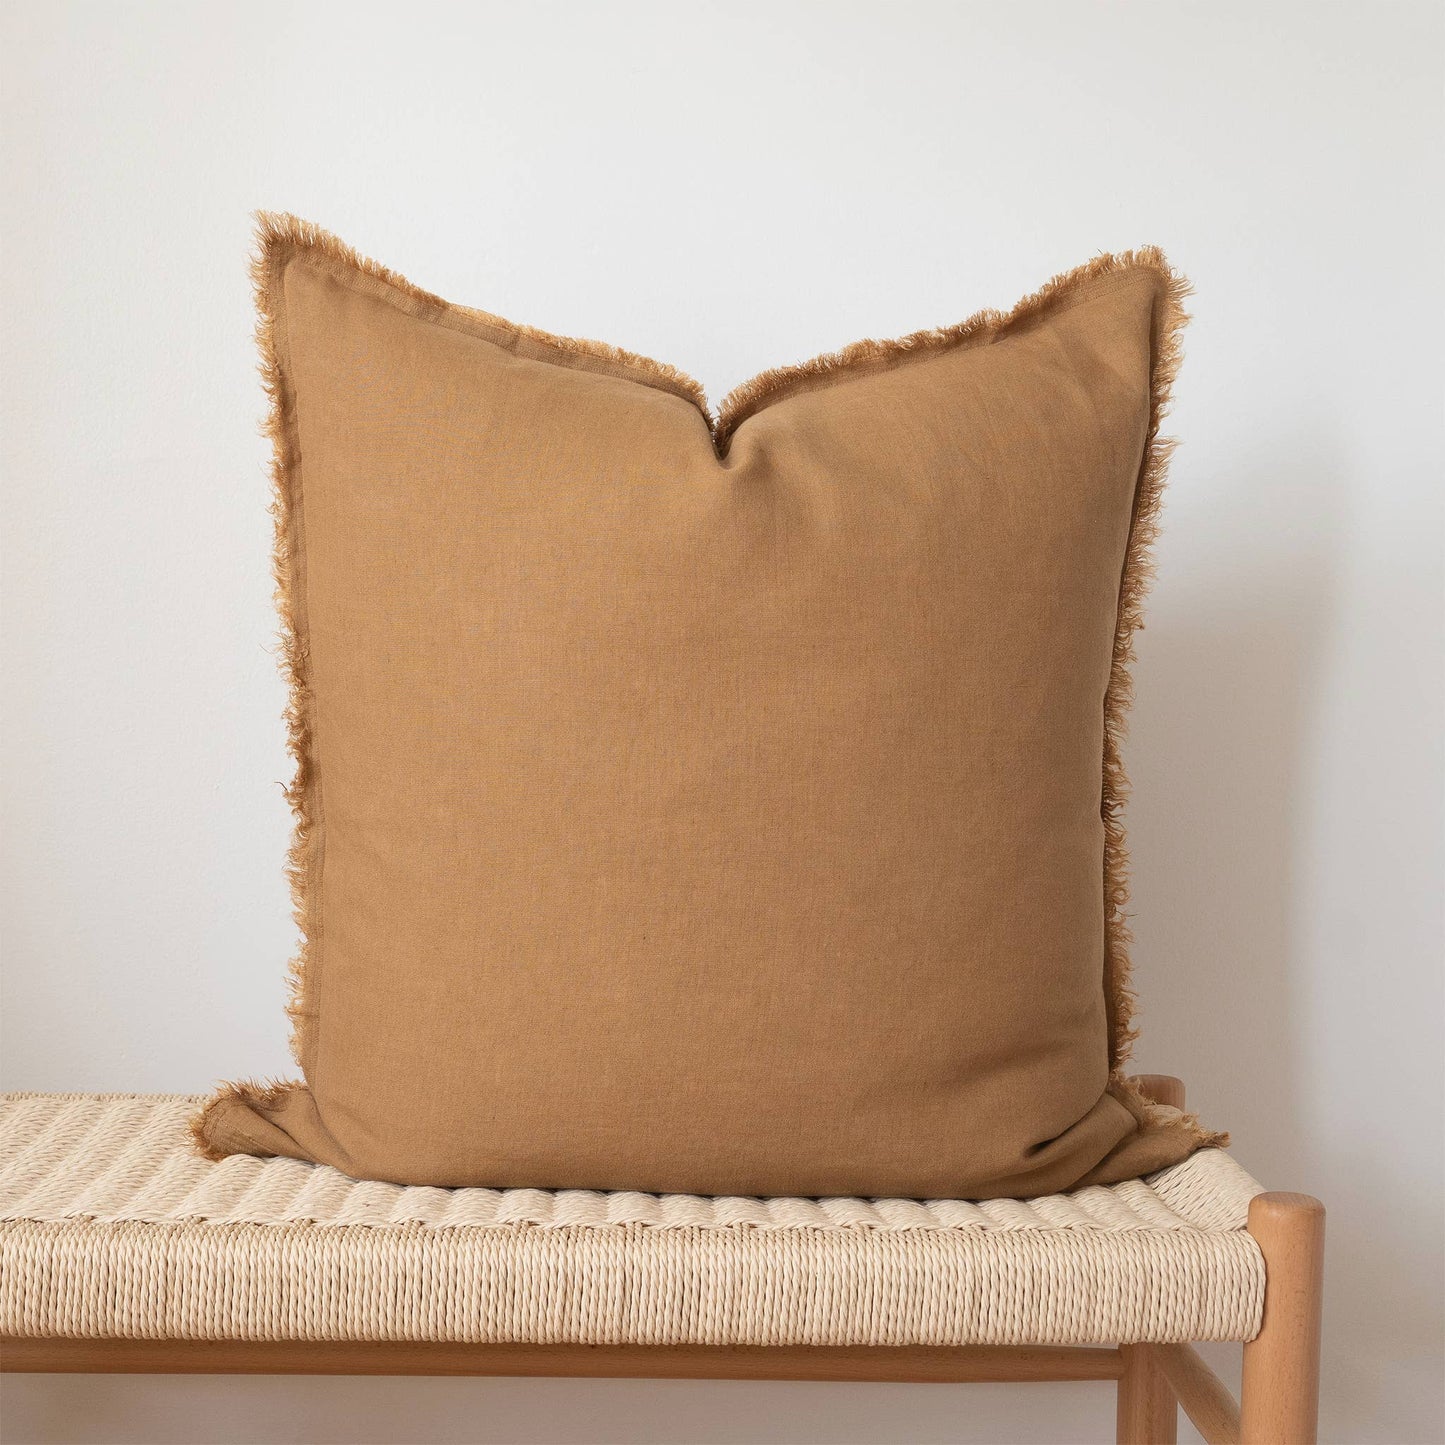 Camel Square Fringed Linen Pillow 24" x 24"